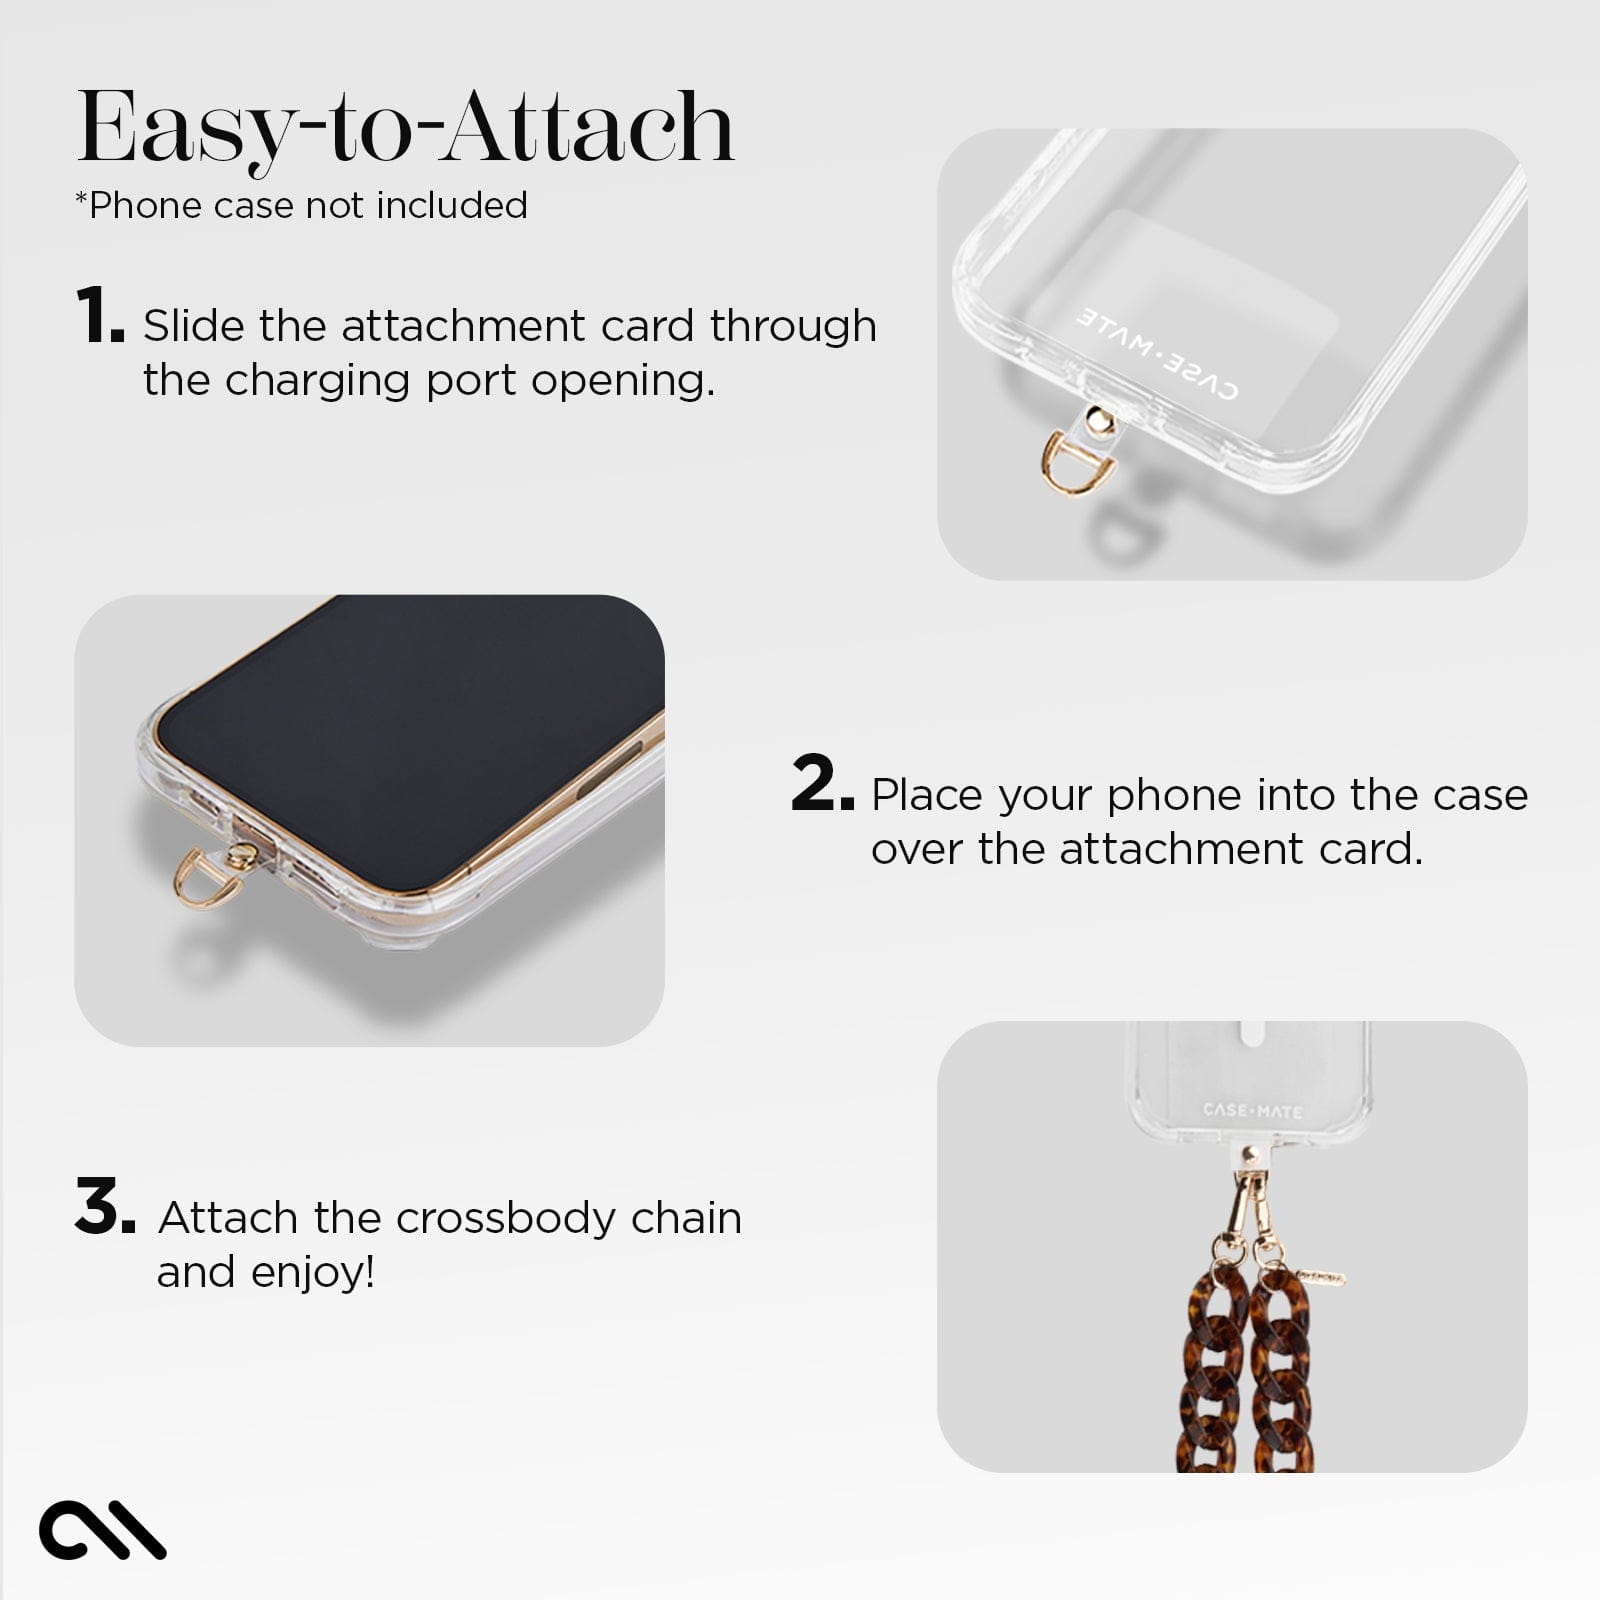 EASY TO ATTACH. *PHONE CASE NOT INCLUDED. 1. SLIDE THE ATTACHMENT CARD THROUGH THE CHARGING PORT OPENING. 2. PLACE YOUR PHONE INTO THE CASE OVER THE ATTACHMENT CARD. 3. ATTACH THE CROSSBODY CHAIN AND ENJOY!